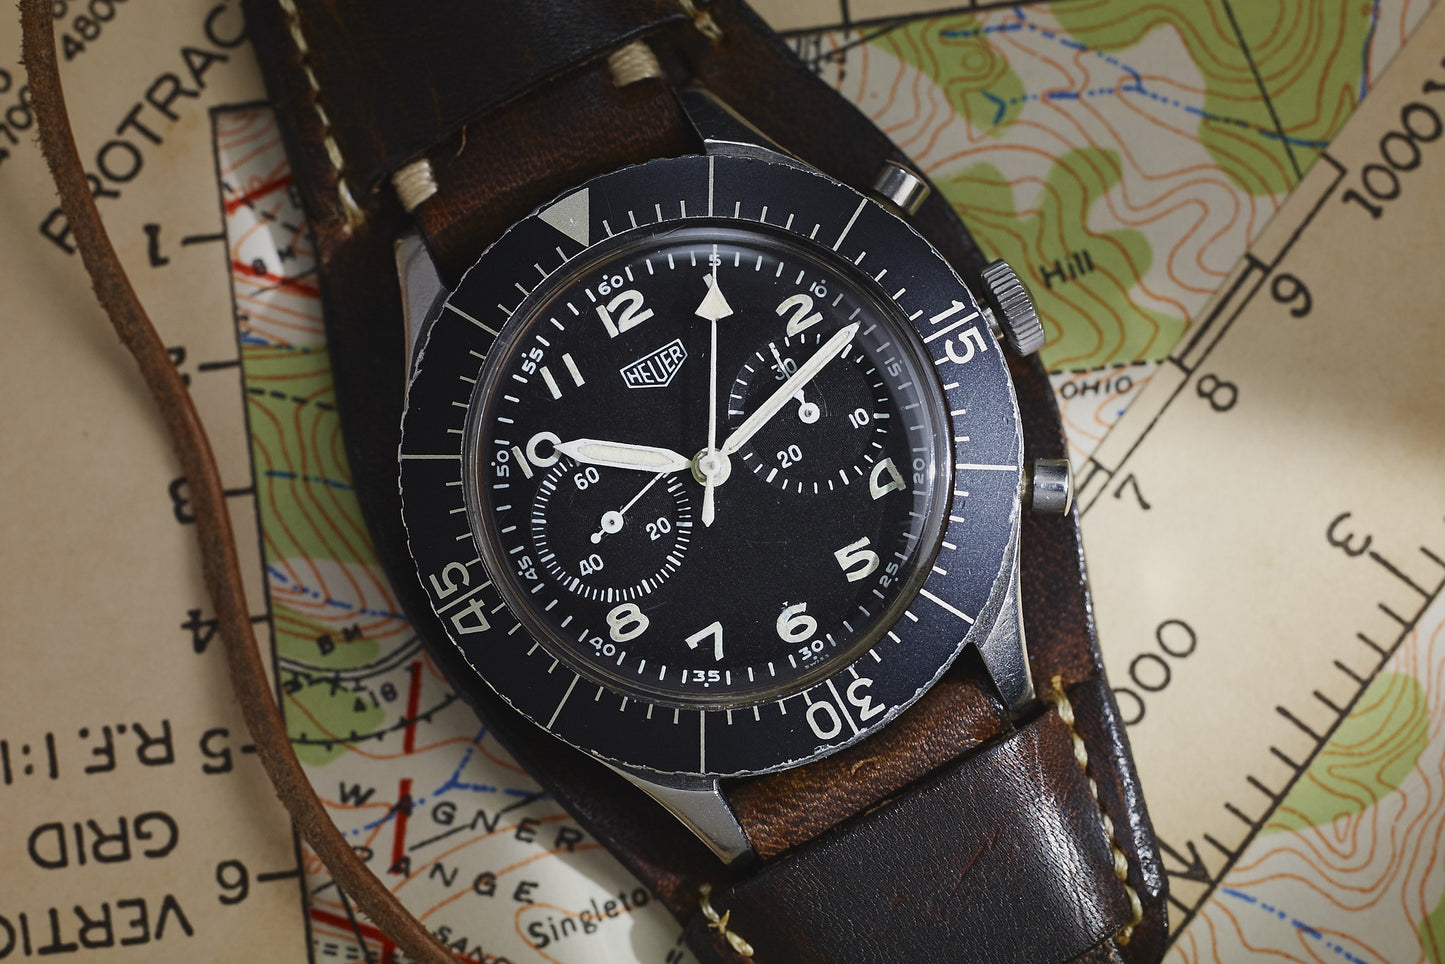 Heuer Bundeswehr Chronograph - "T Only" Dial